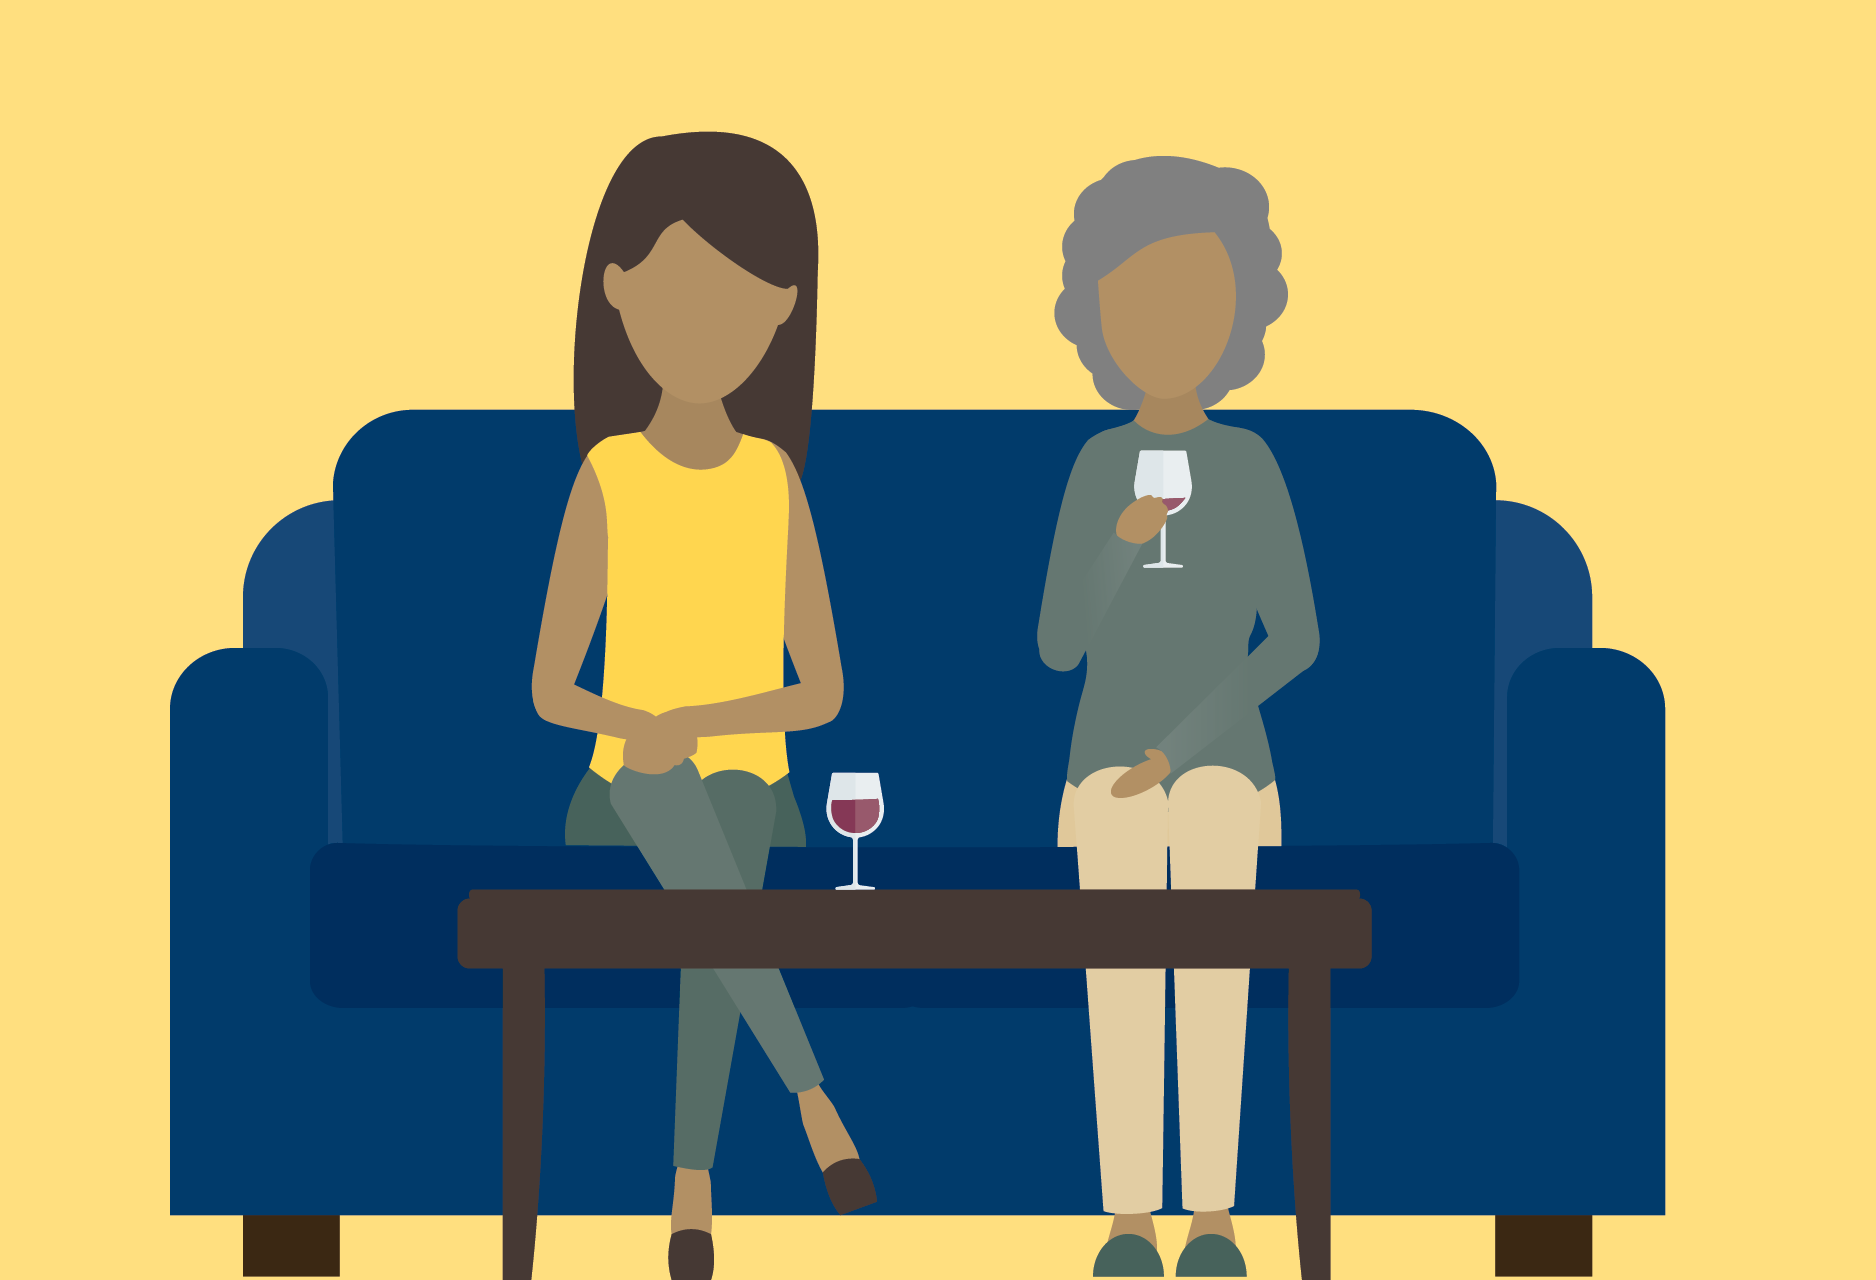 Two women sitting on a couch drinking wine